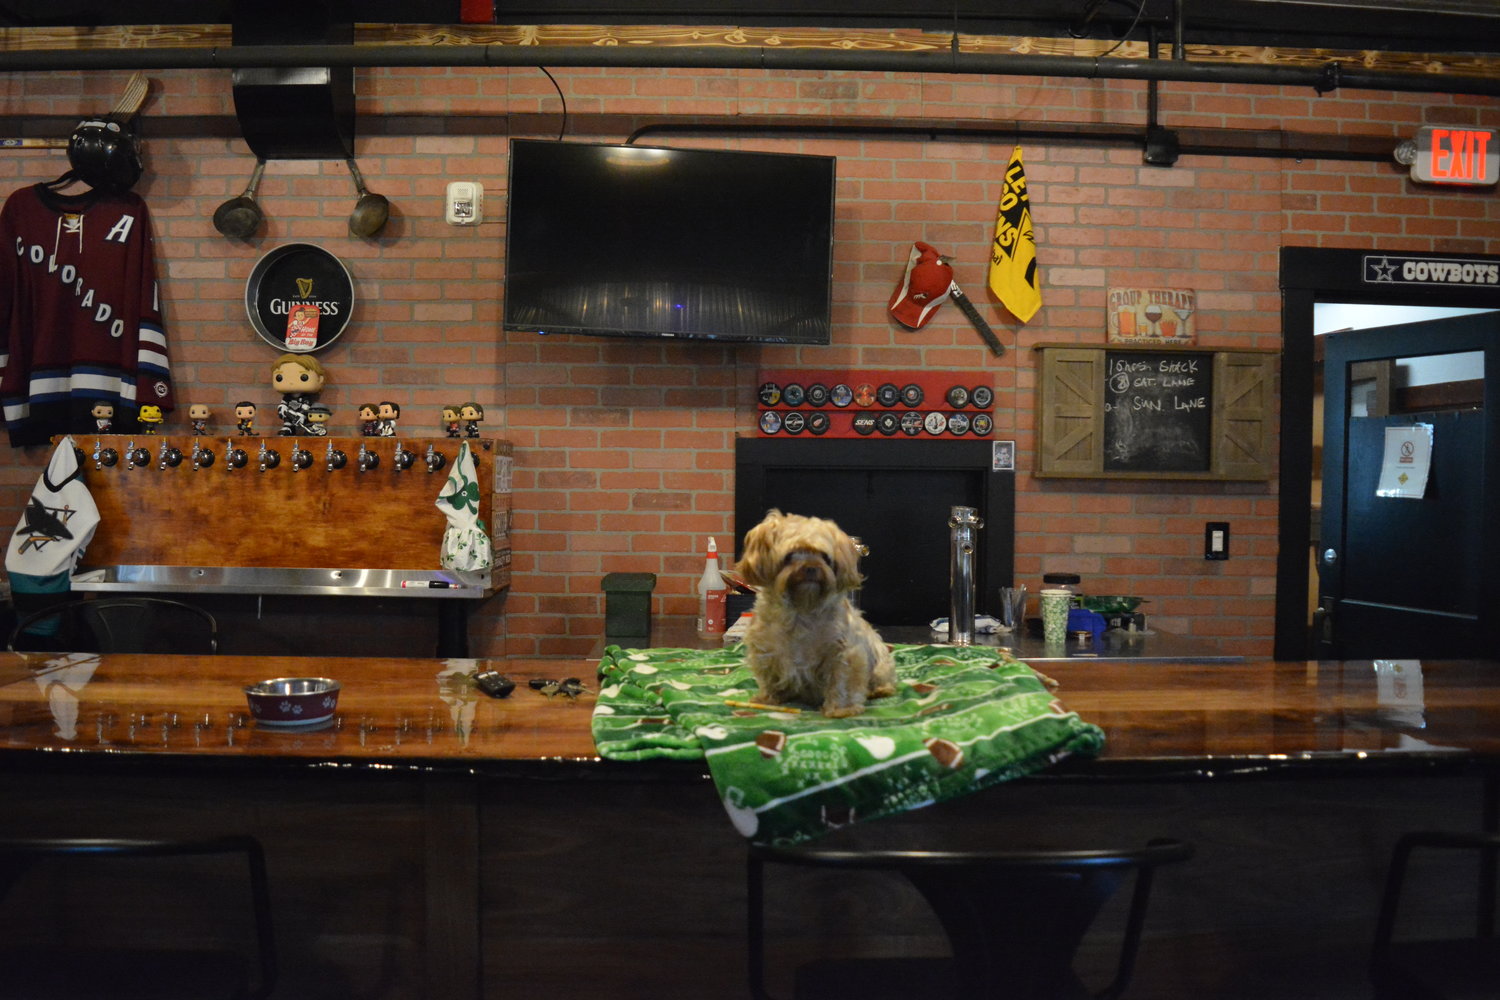 Clover, the “queen” of Cloverlane, is pictured relaxing at the pub.